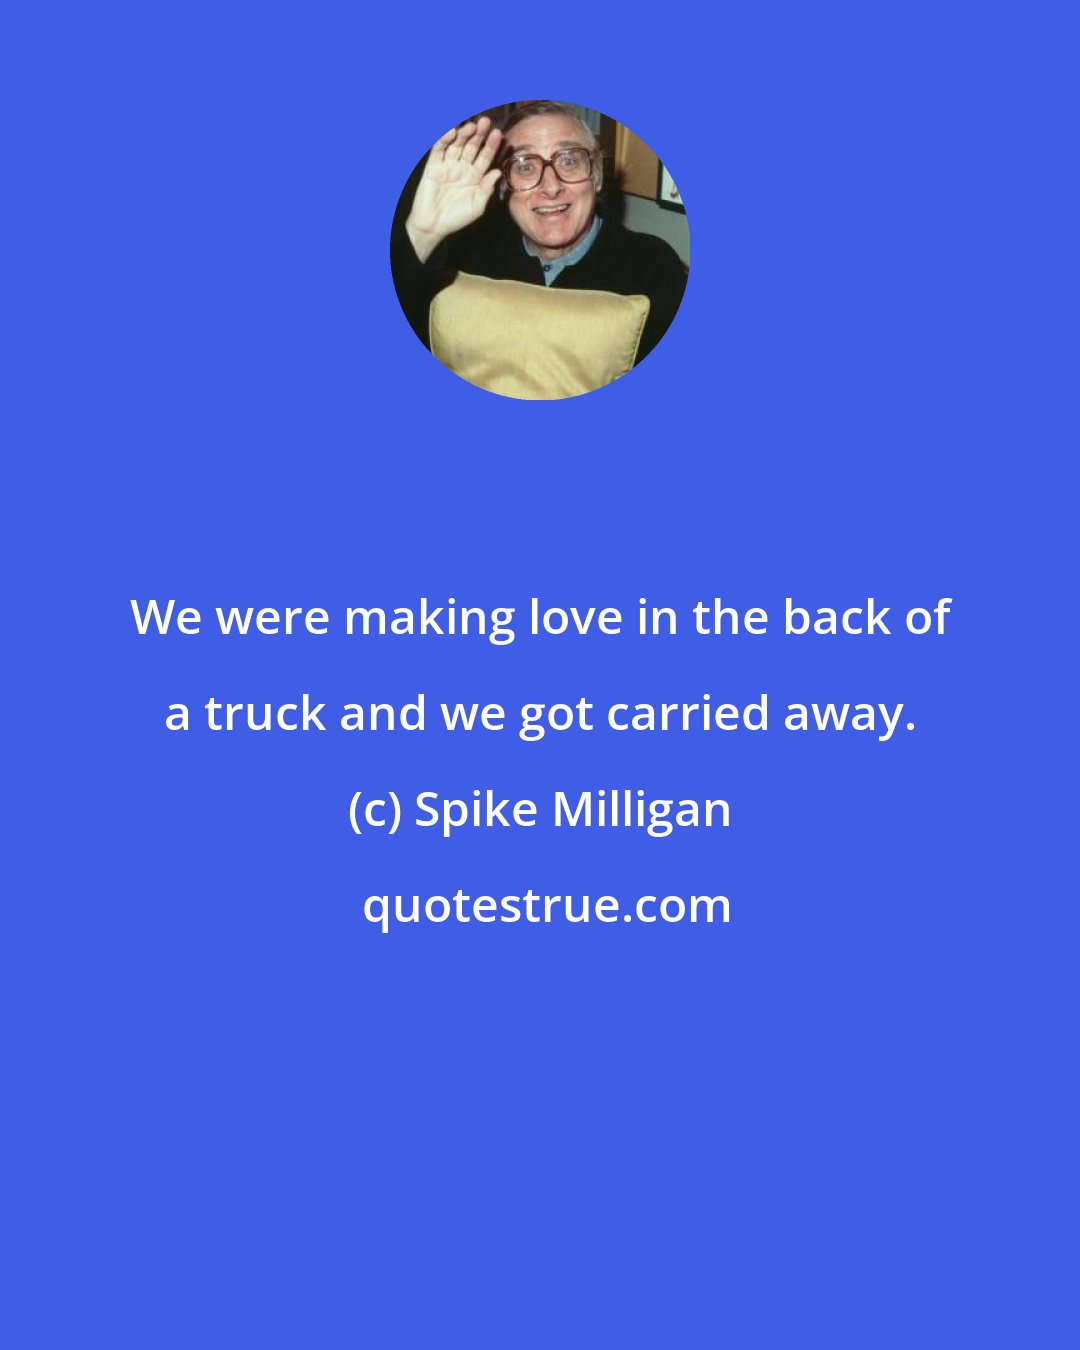 Spike Milligan: We were making love in the back of a truck and we got carried away.